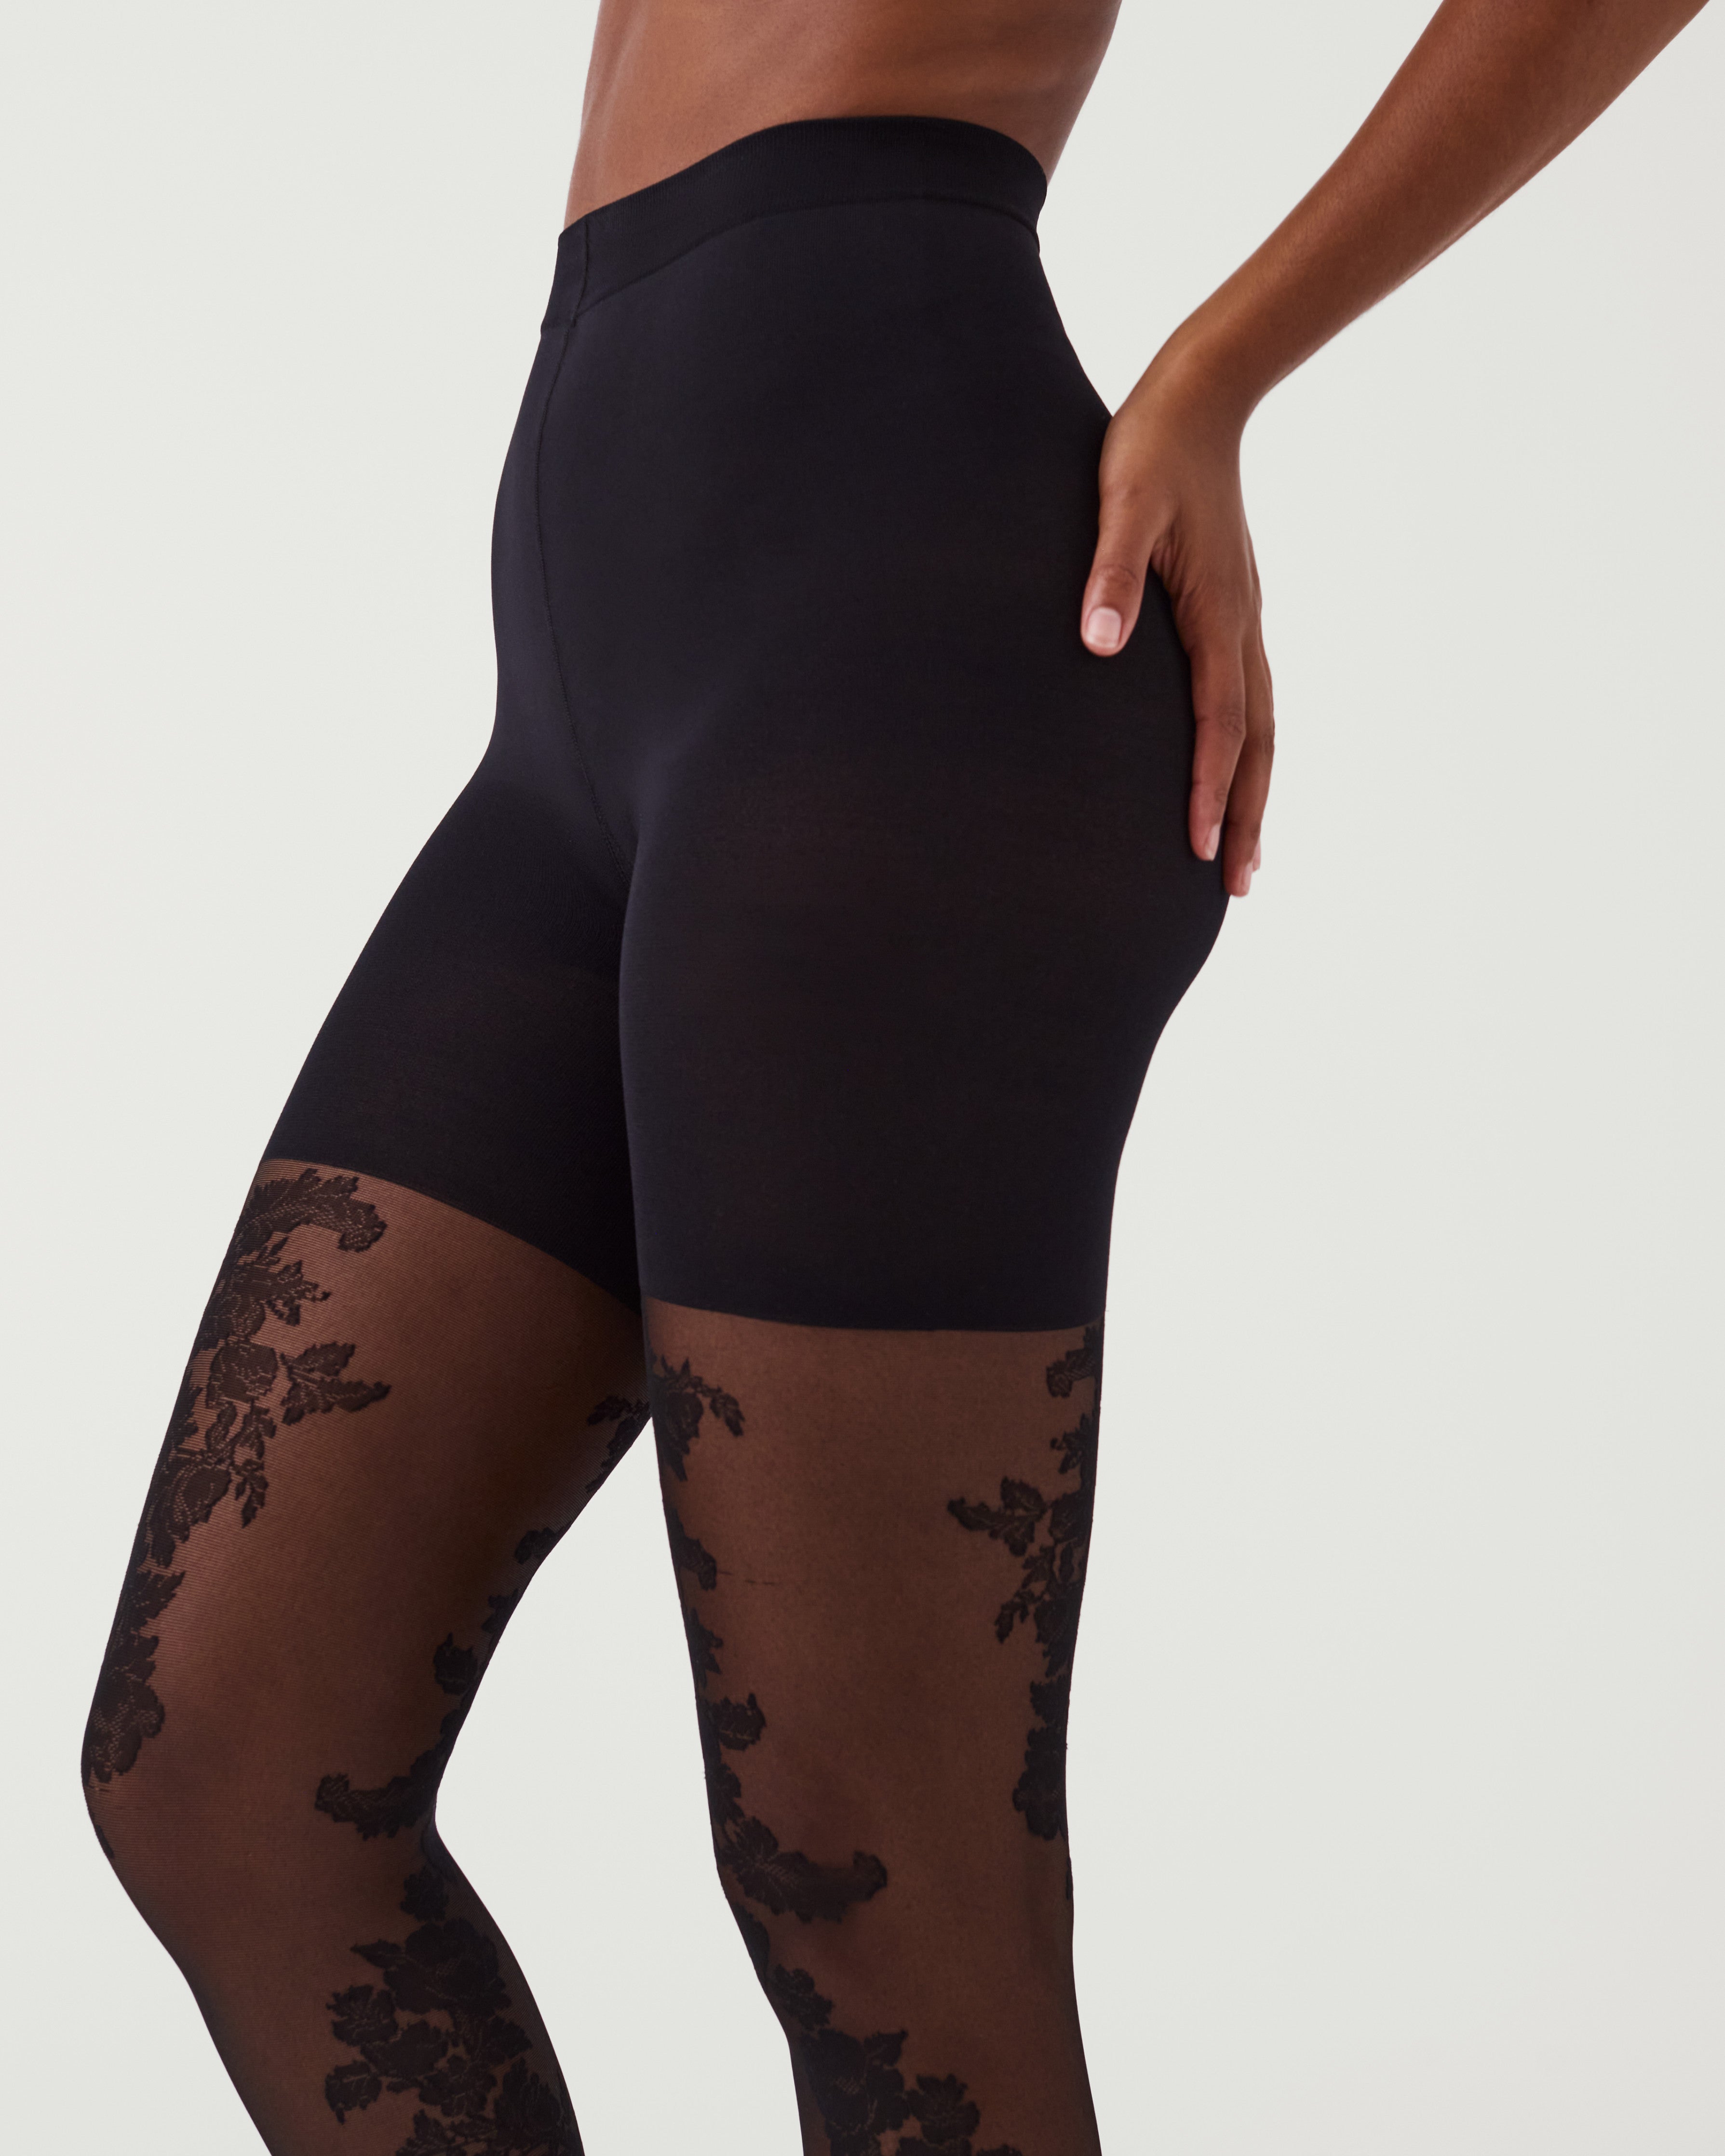 Spanx Patterned Tight End Tights Stunning Roses, $32